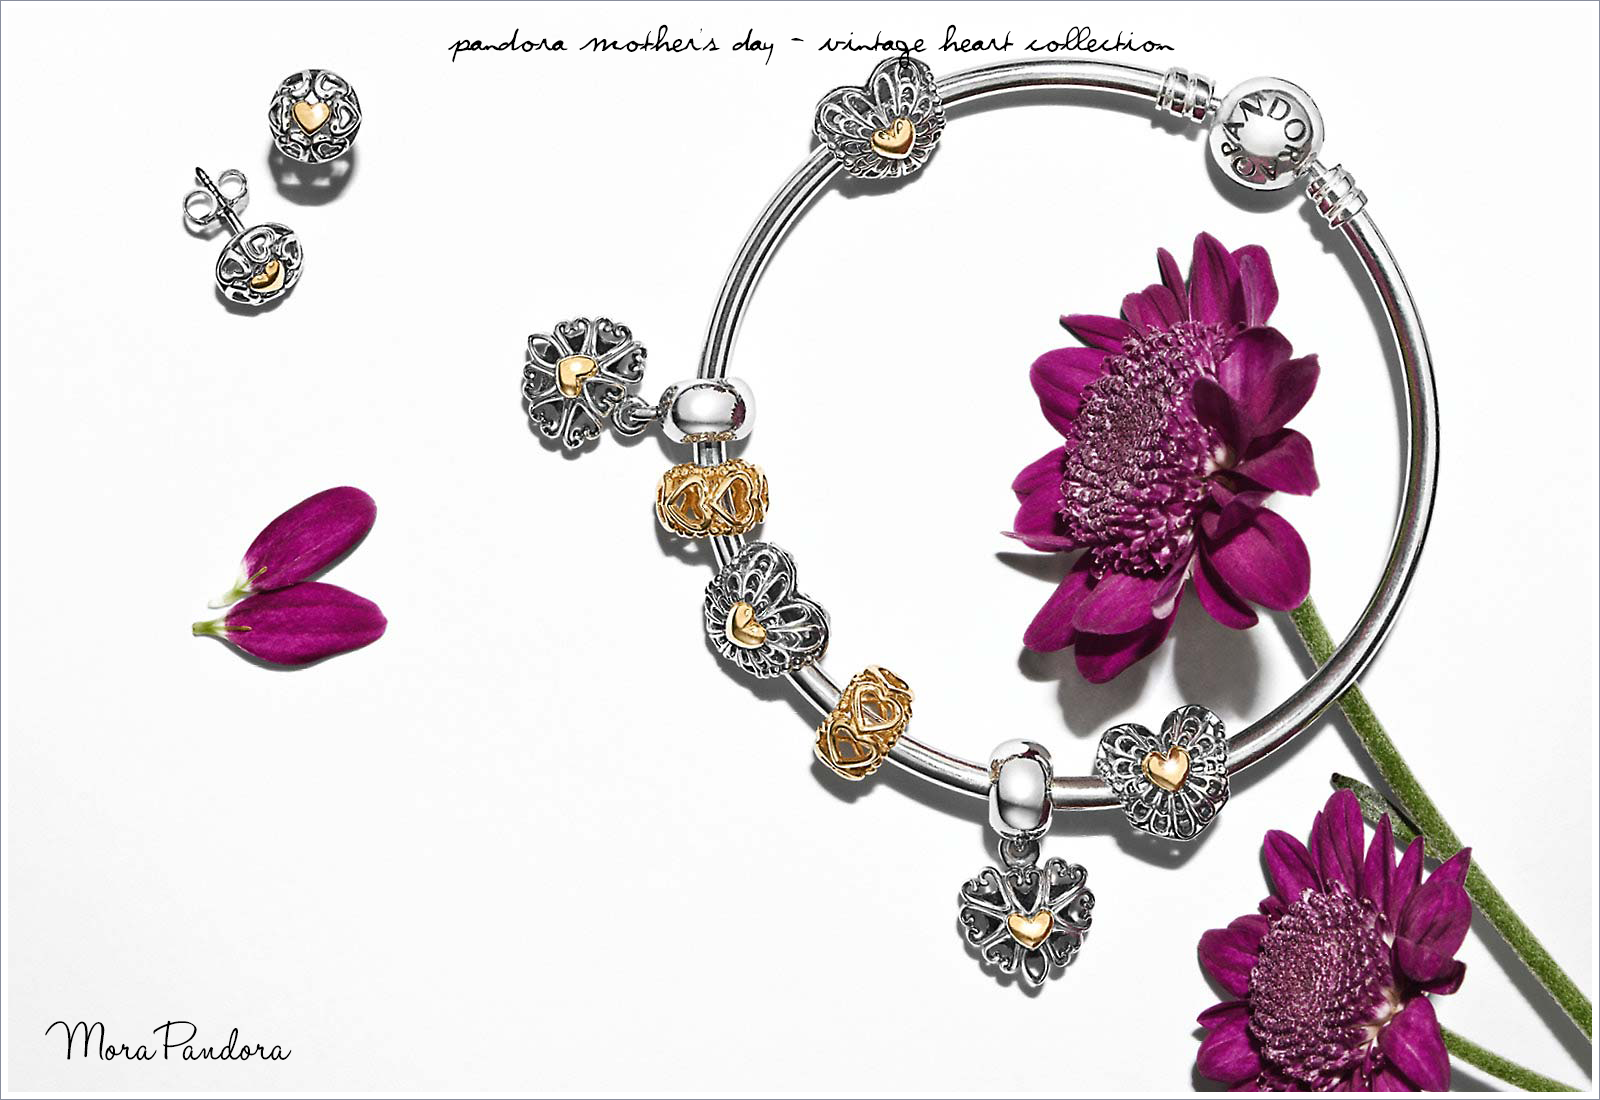 pandora mother's day campaign 2014 vintage heart